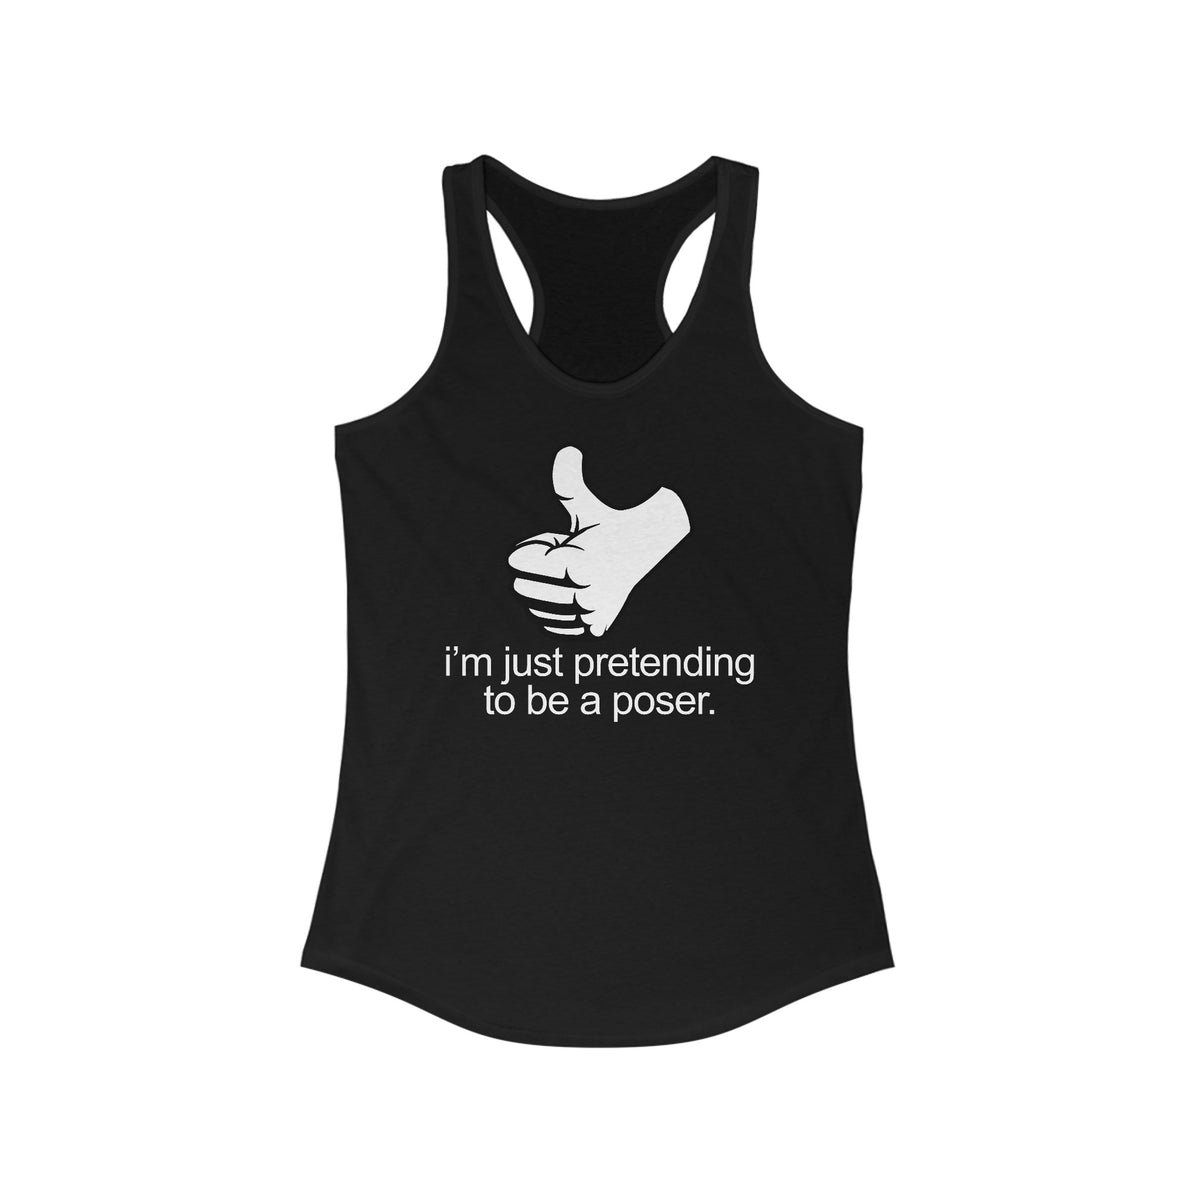 I'm Just Pretending To Be A Poser - Women's Racerback Tank